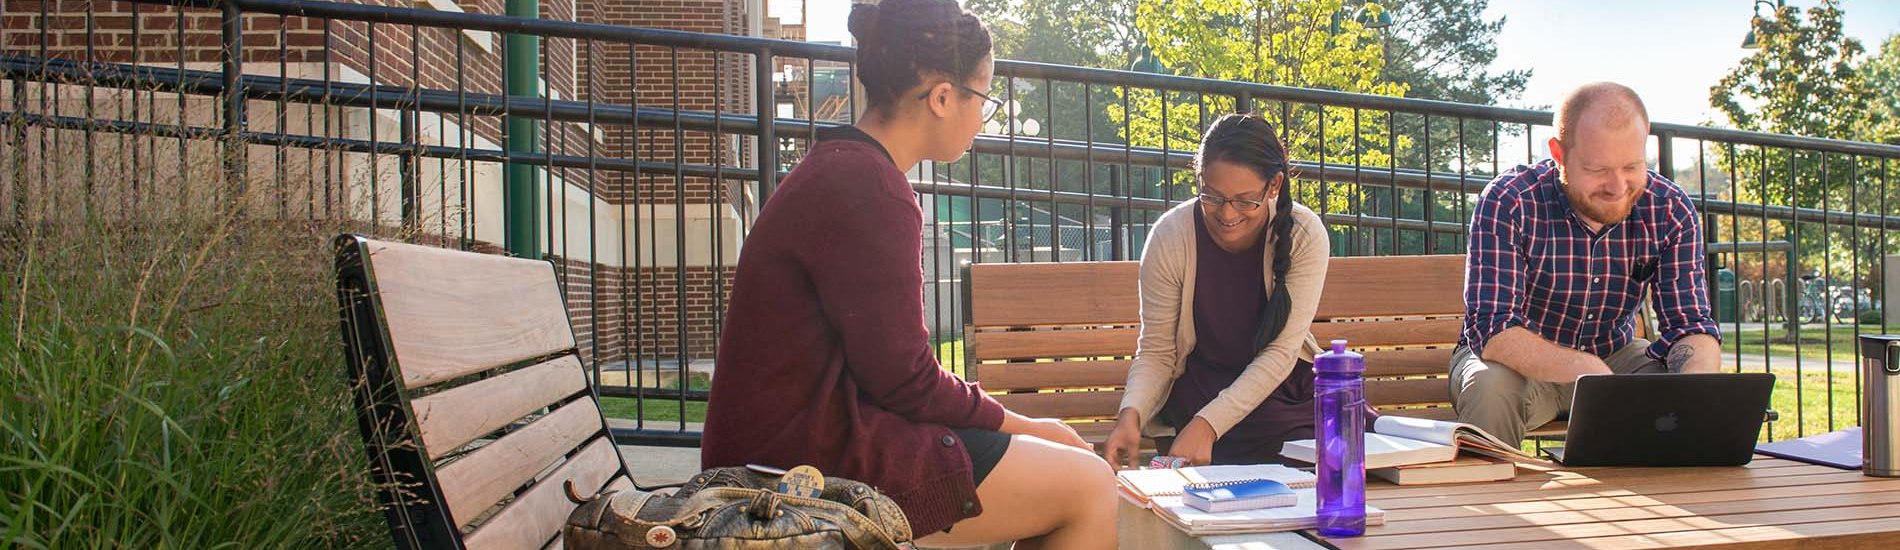 Students studying in a UAlbany Downtown Campus courtyard.